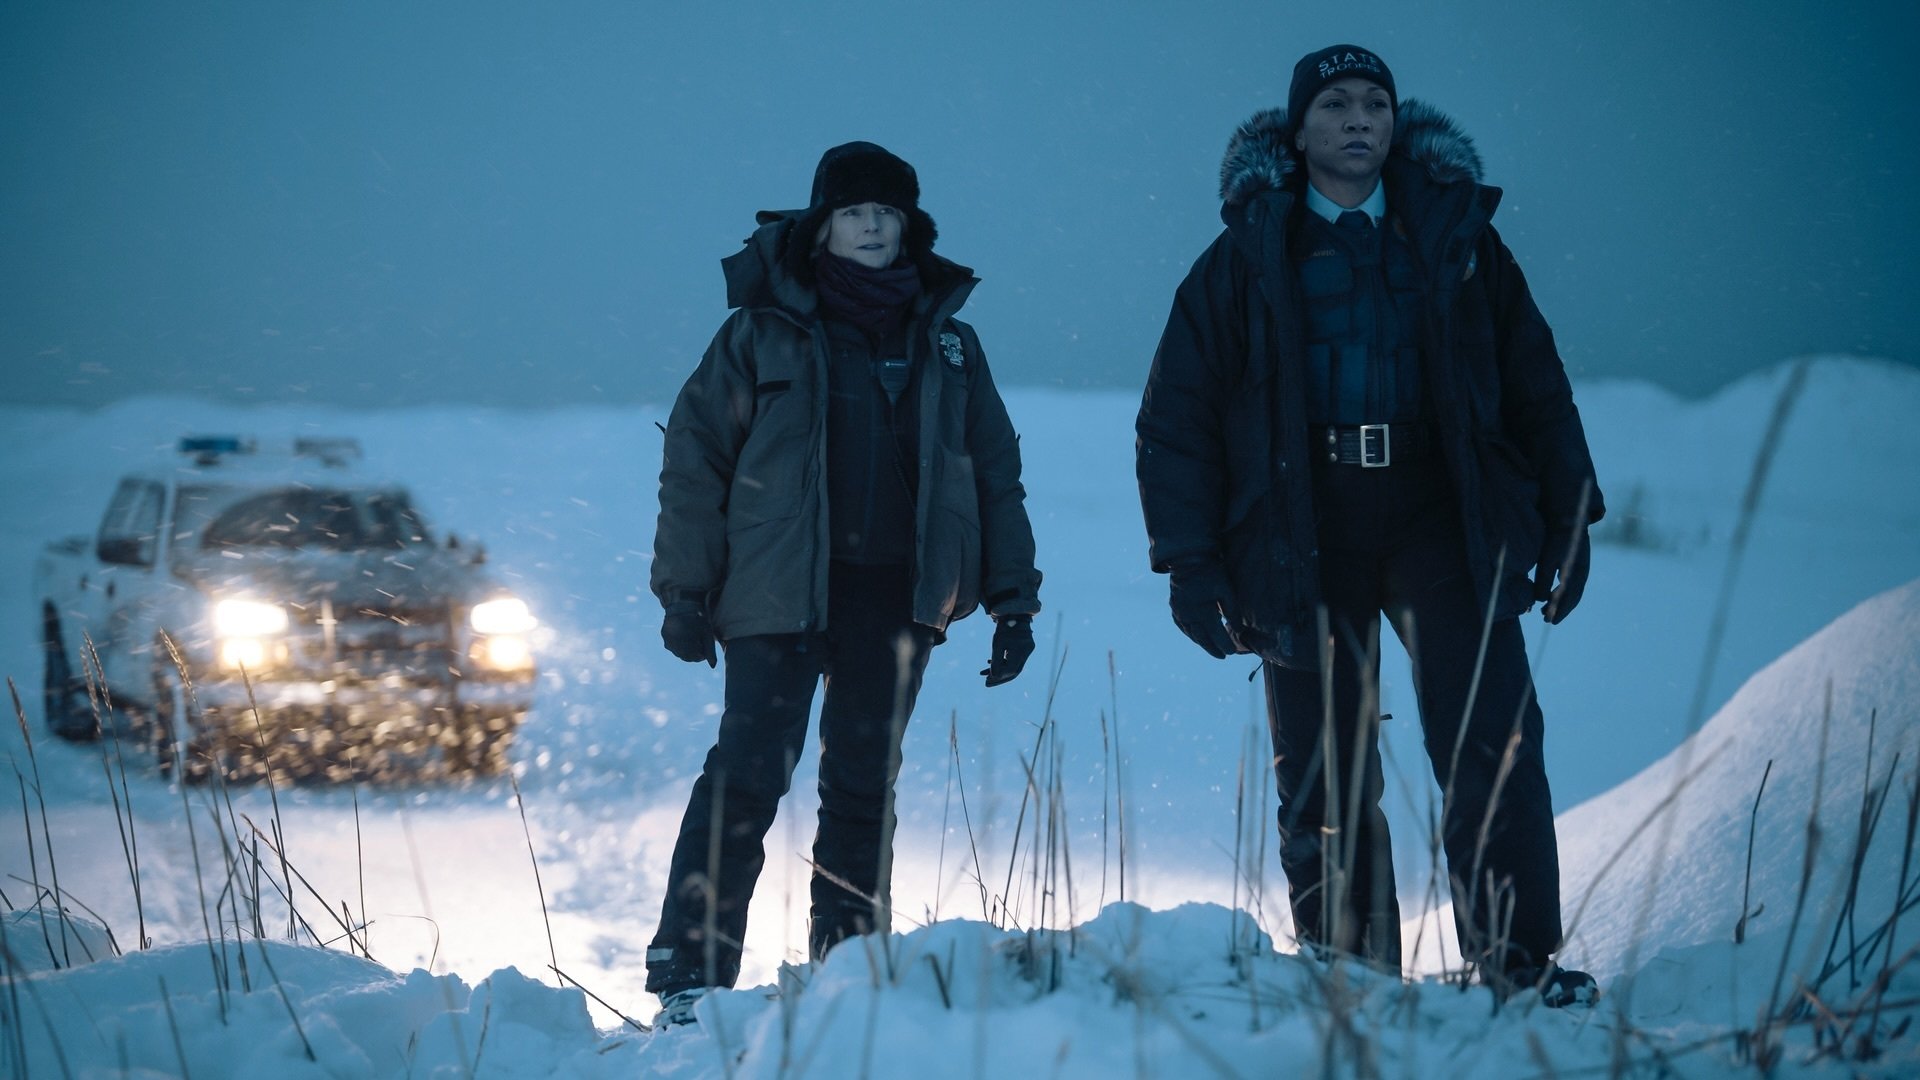 Two women in bulky coats and police uniforms stand in the snow.